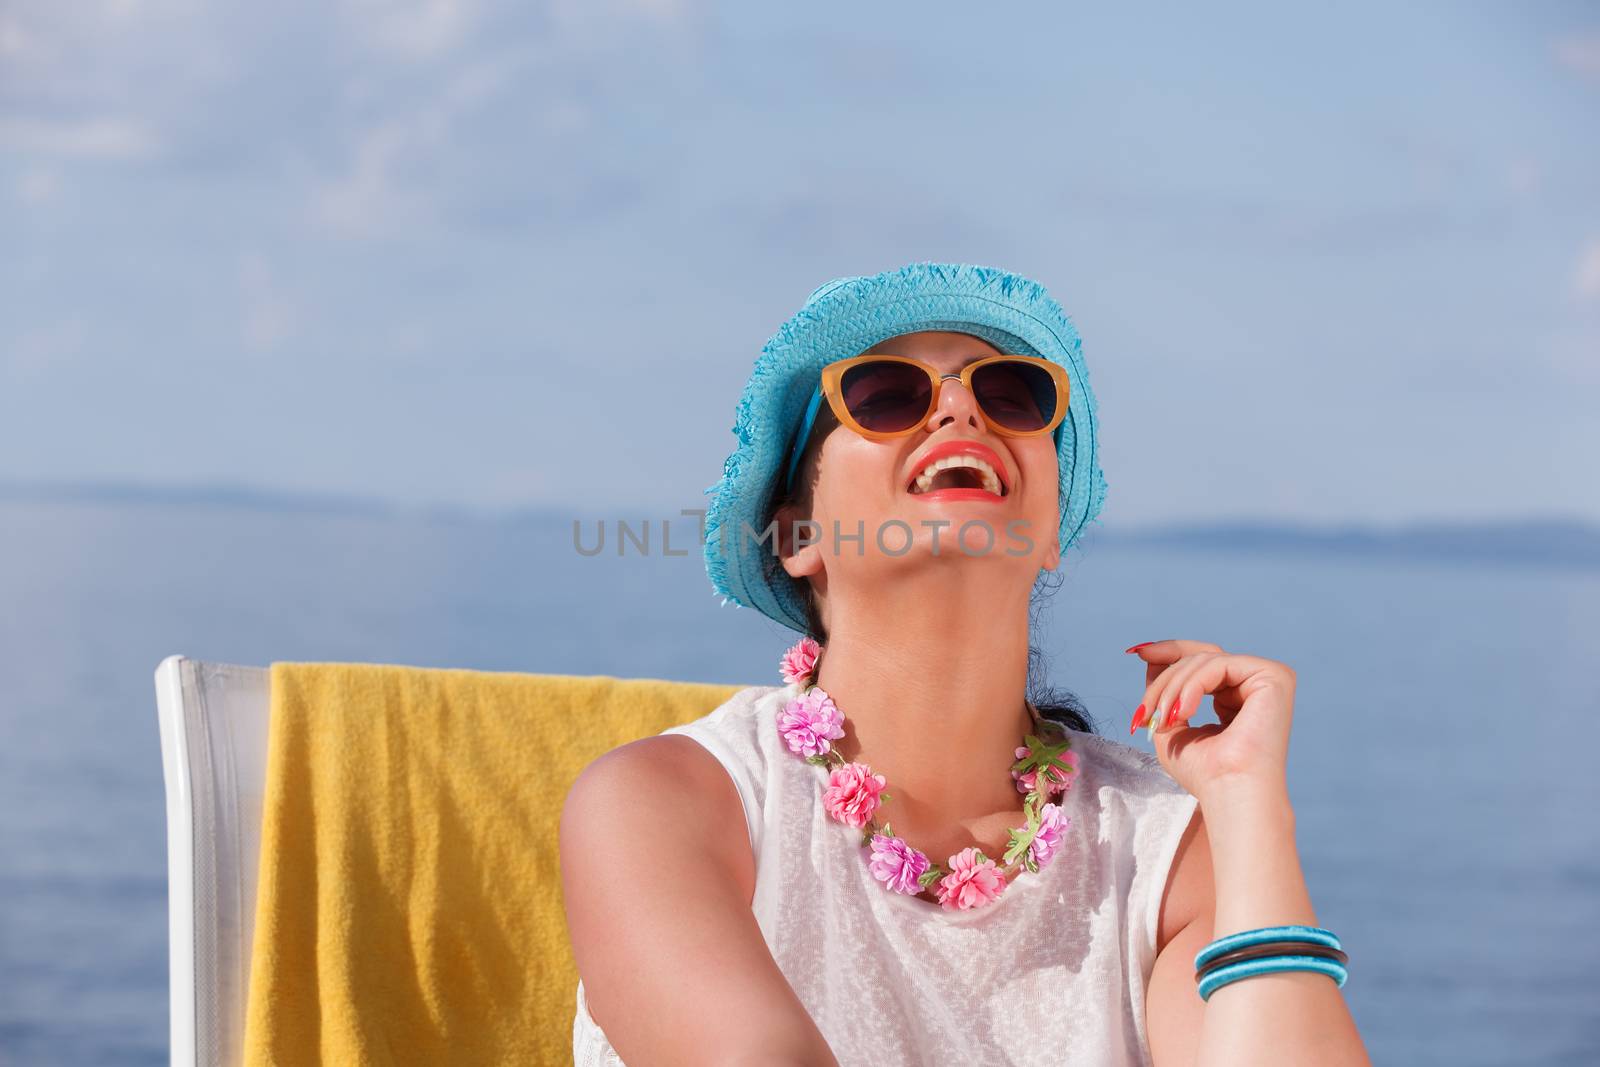 Happy woman with straw hat sitting on lounge chair at the beach and enjoying her beach vacation